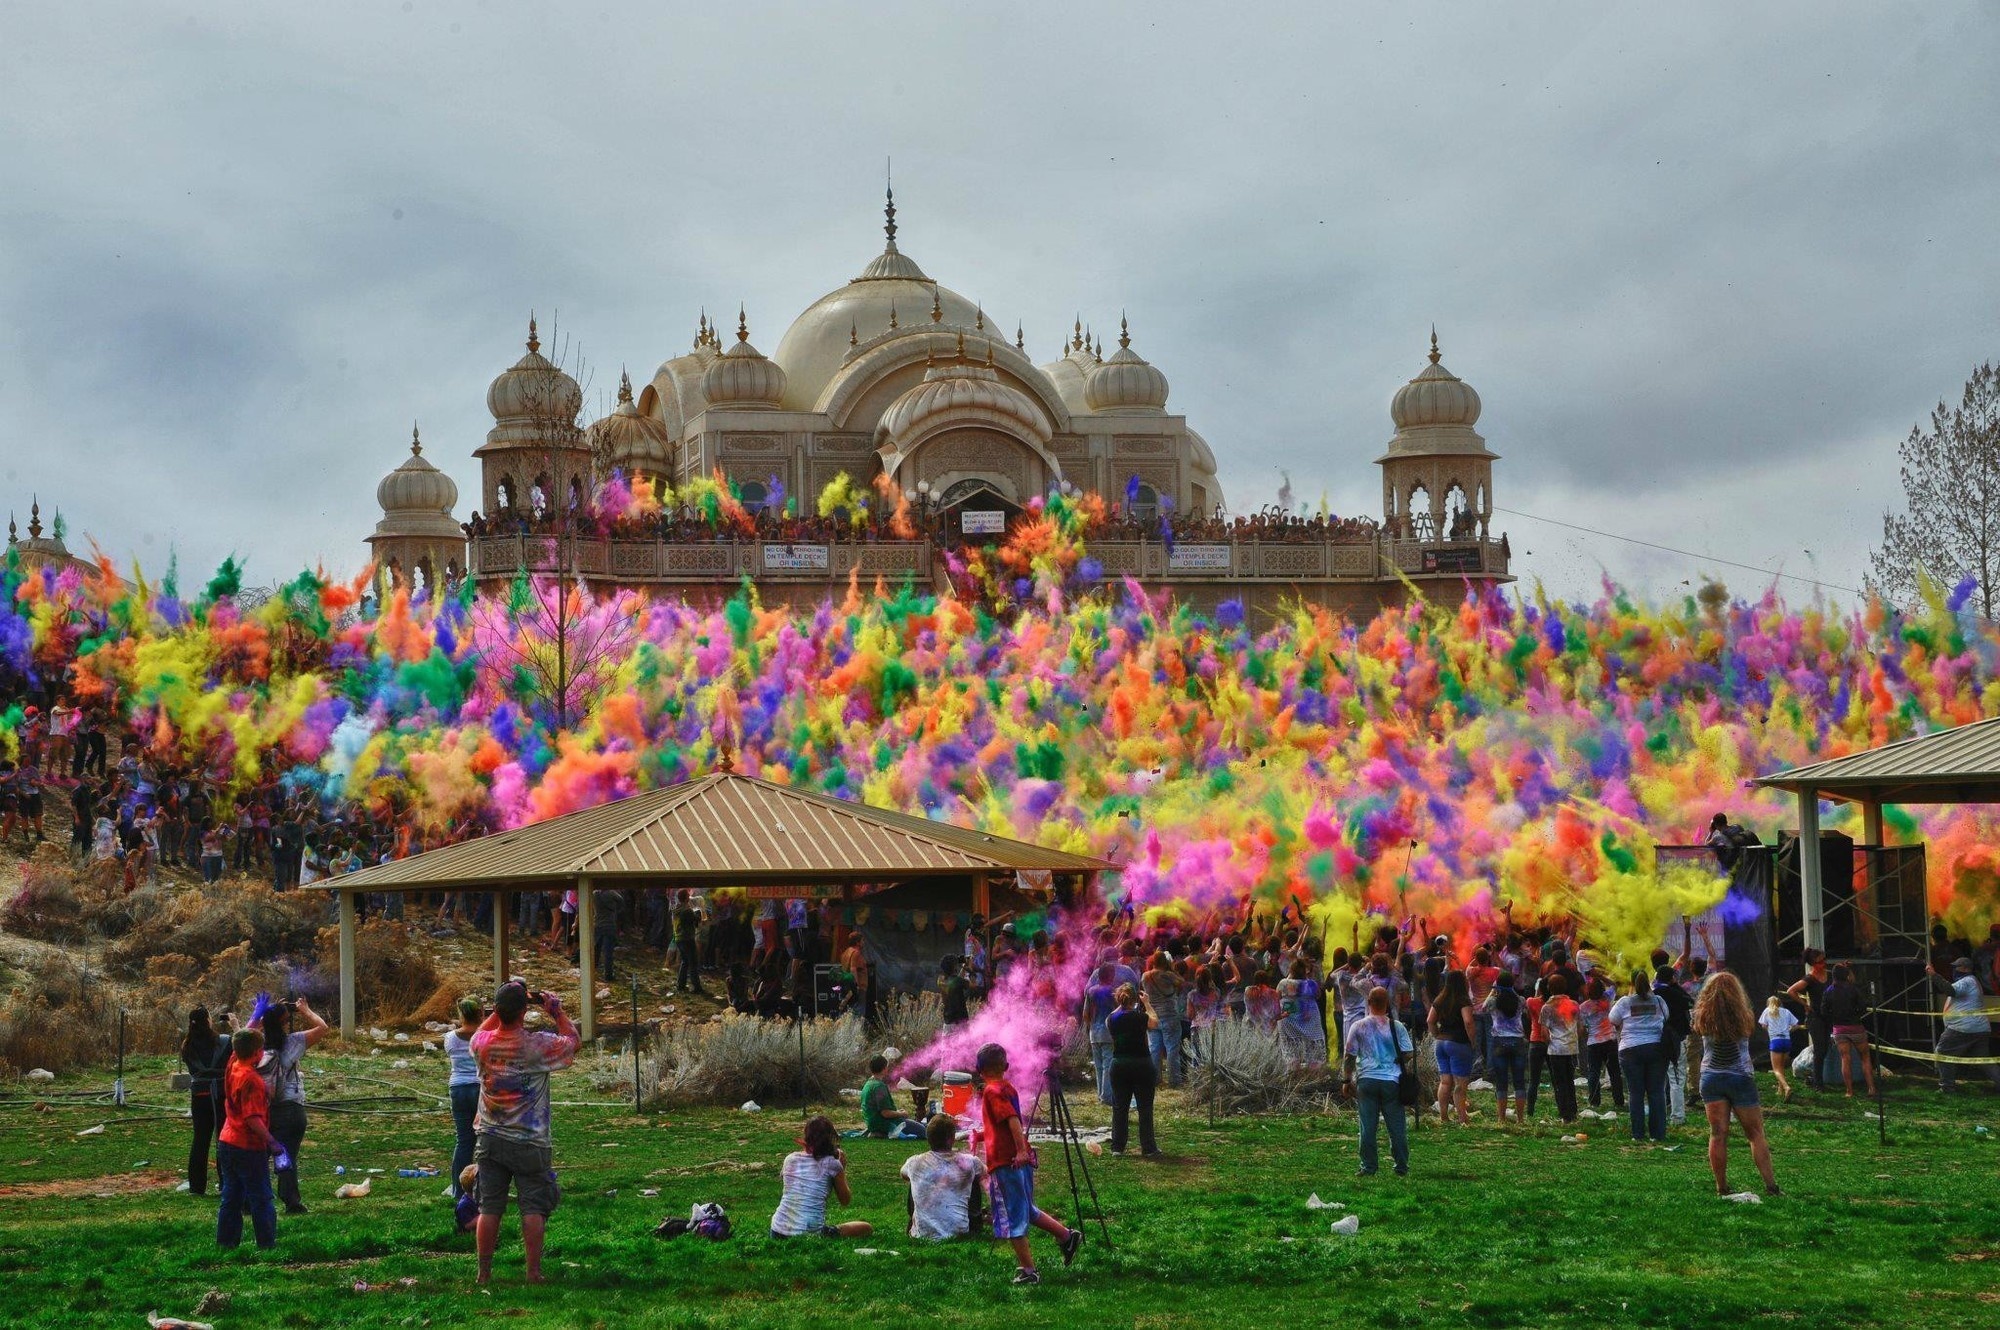 Some seriously cool sights at the Festival of Colors at Sri Sri Radha Krishna Temple.